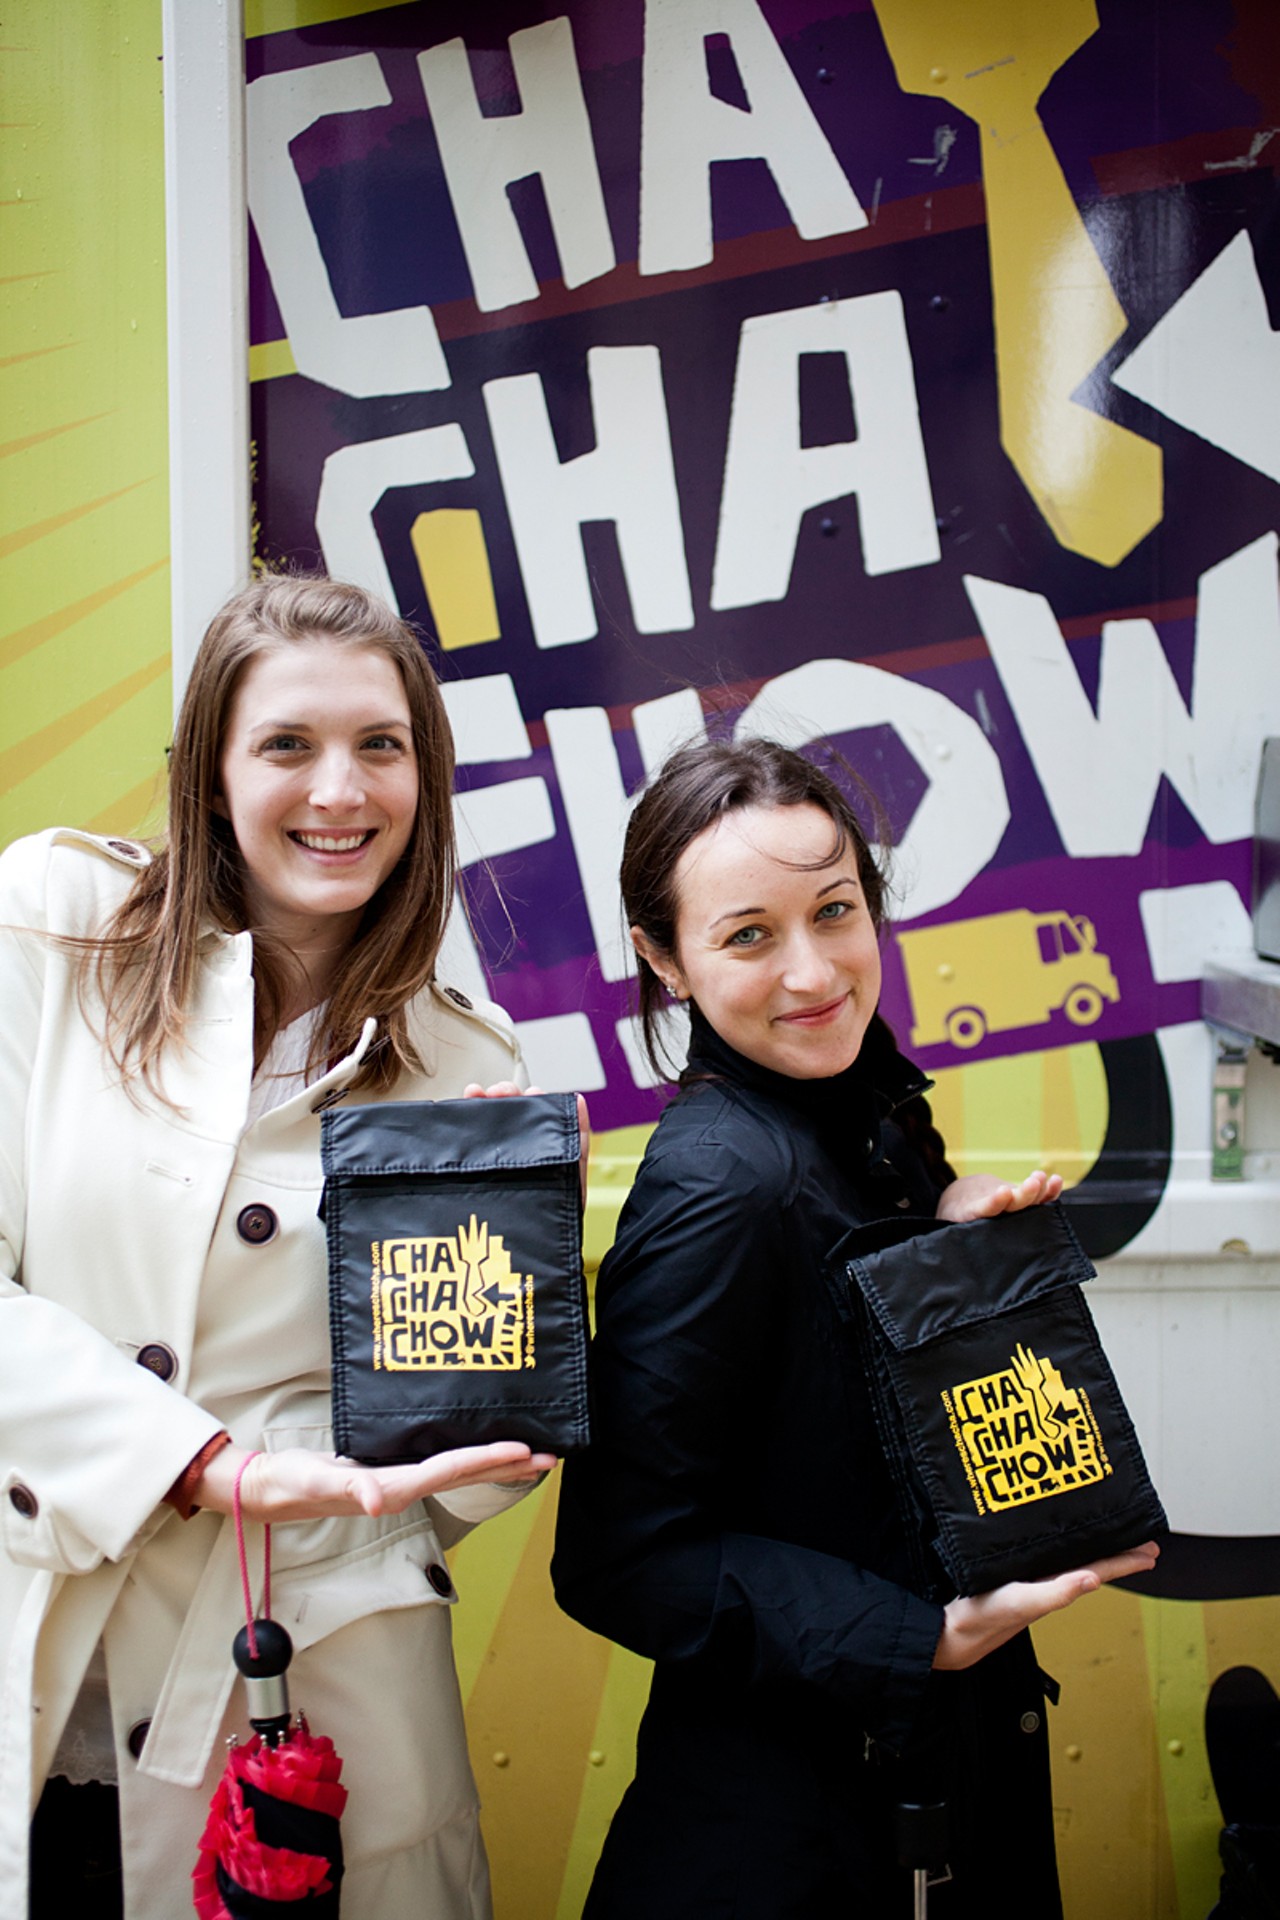 Regulars, Beth Babb and Julia Meisler showing off their Cha Cha Chow sacks that the food truck was giving away to celebrate their one-year anniversary.